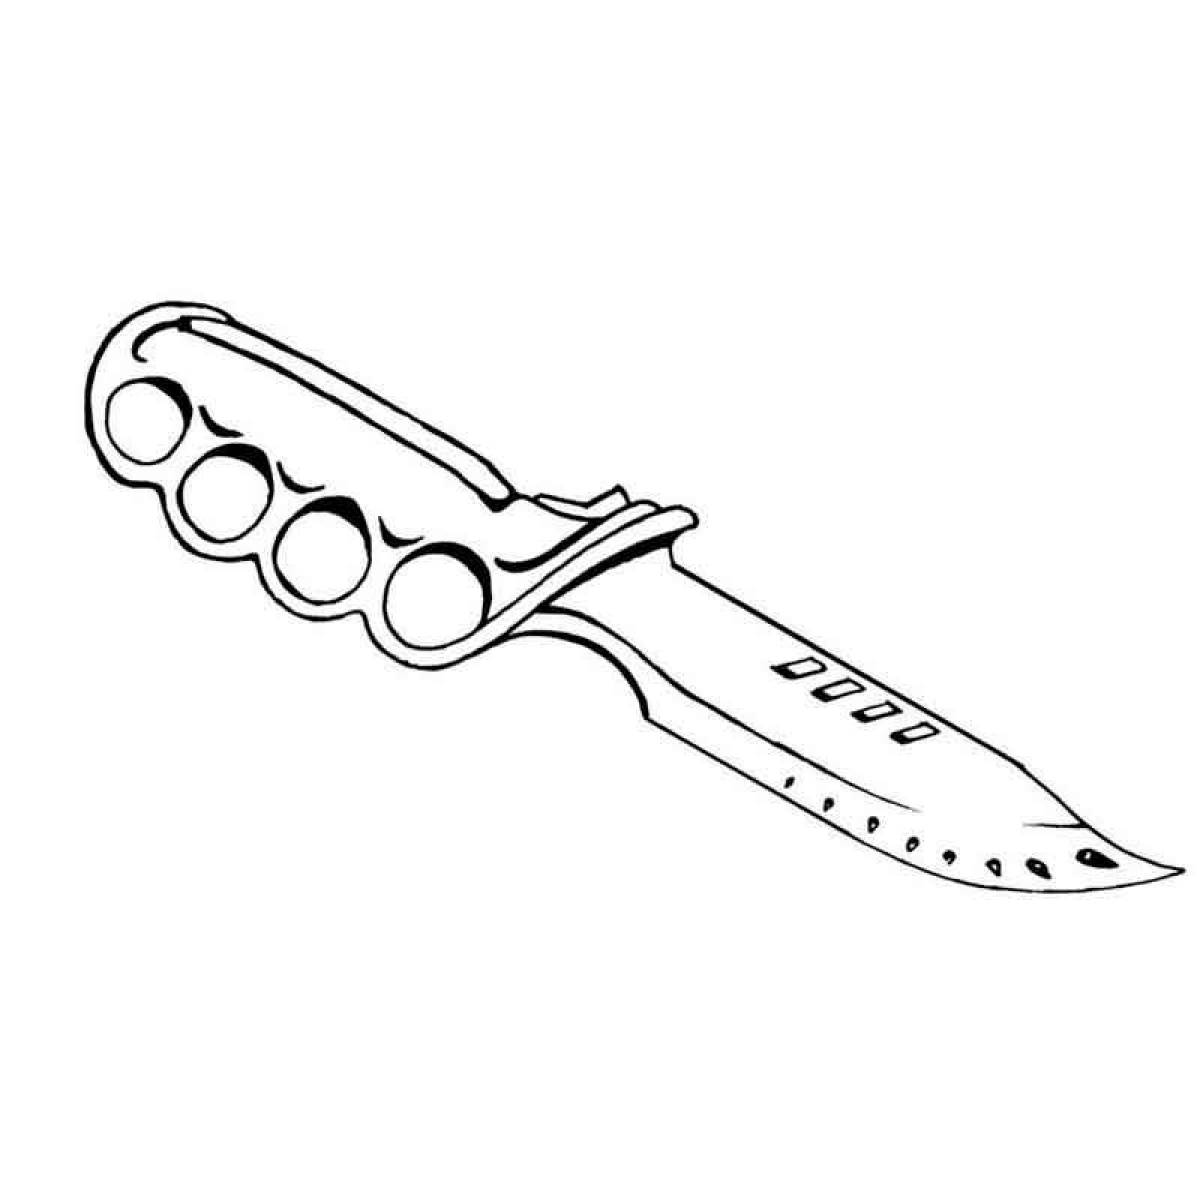 Breaking knives from standoff 2 coloring page